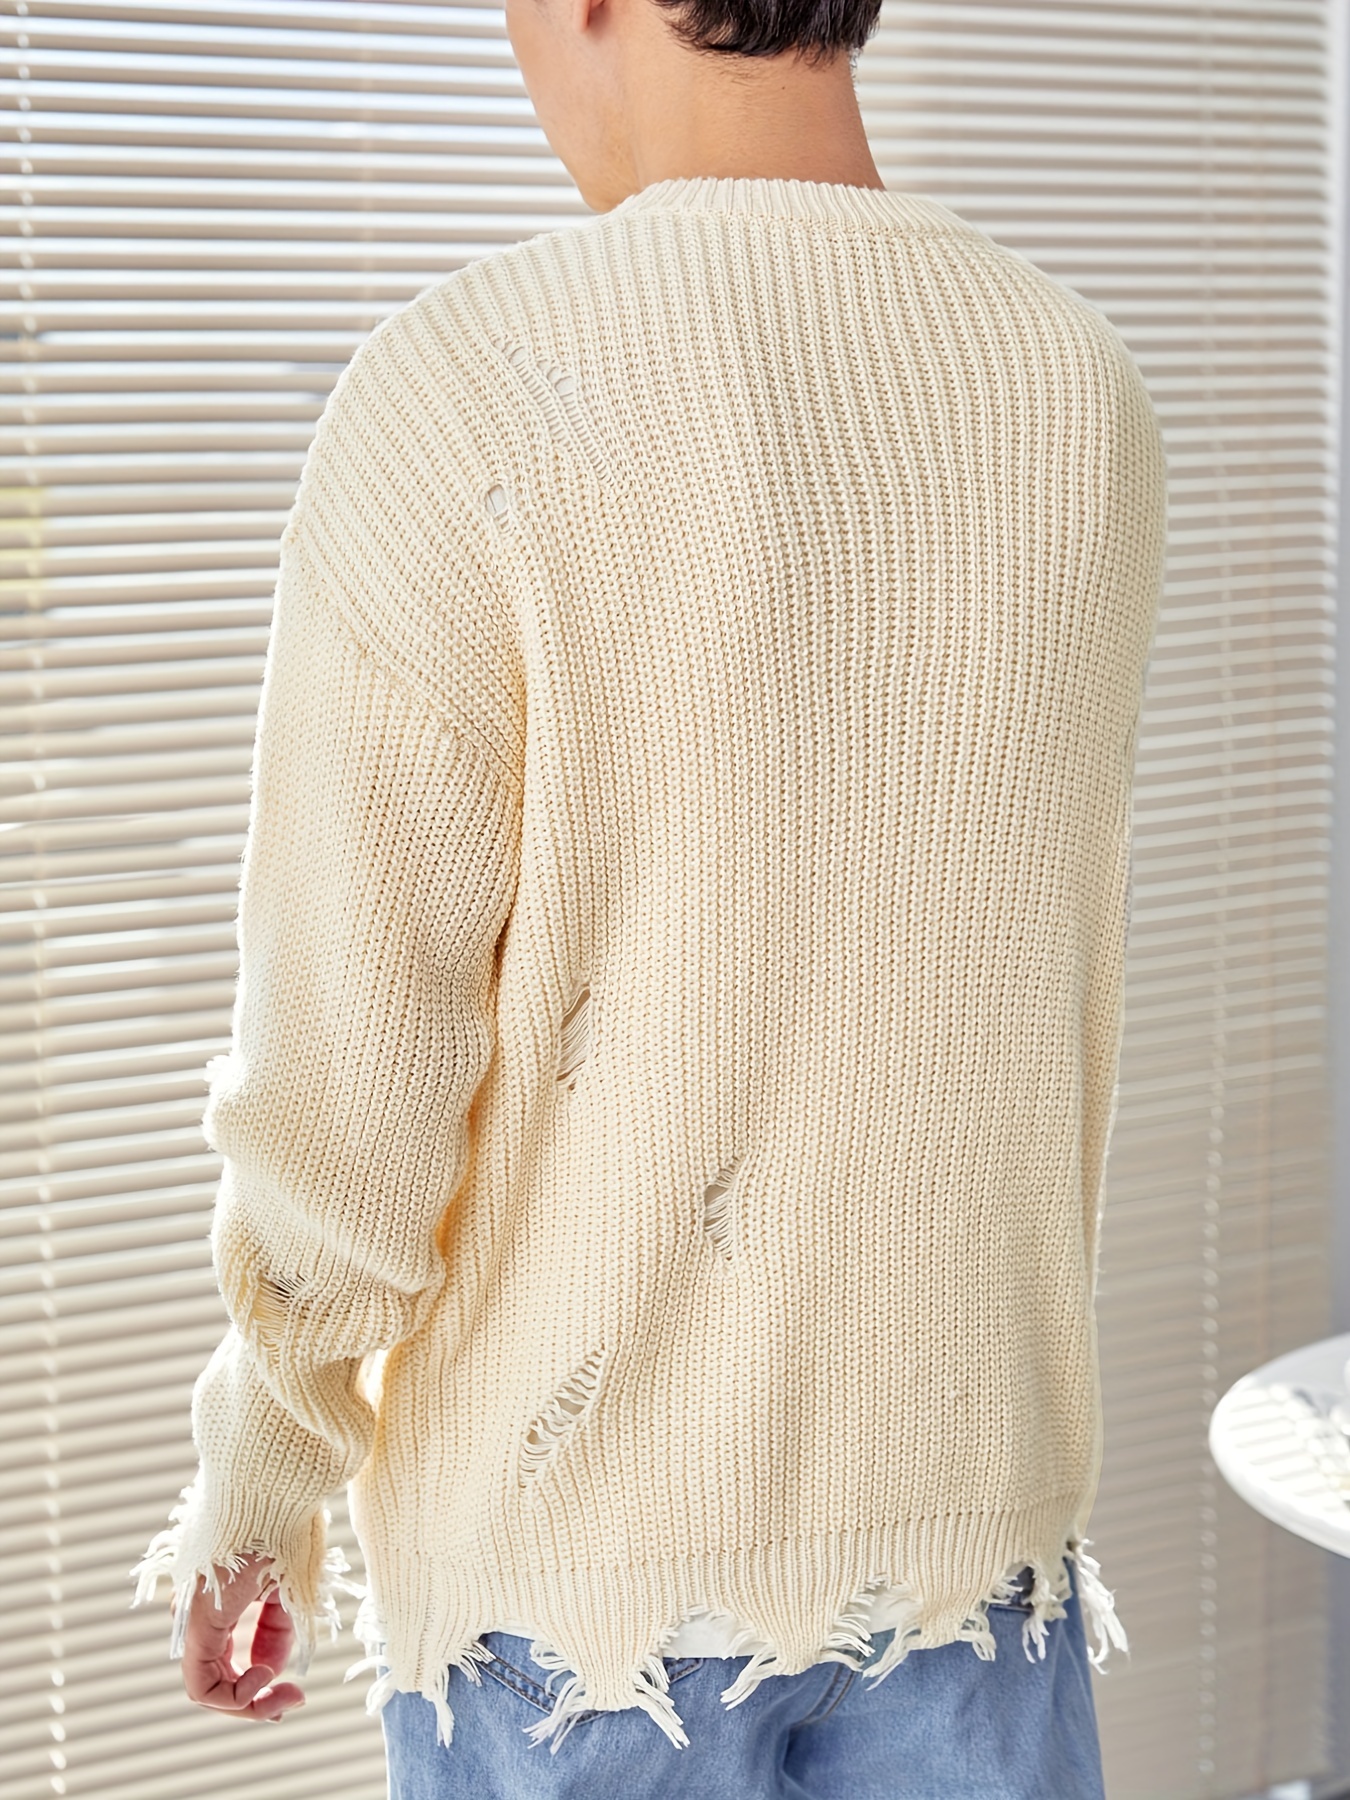 Men's Casual Crewneck Pullover Knitted Sweaters Jumpers Baggy